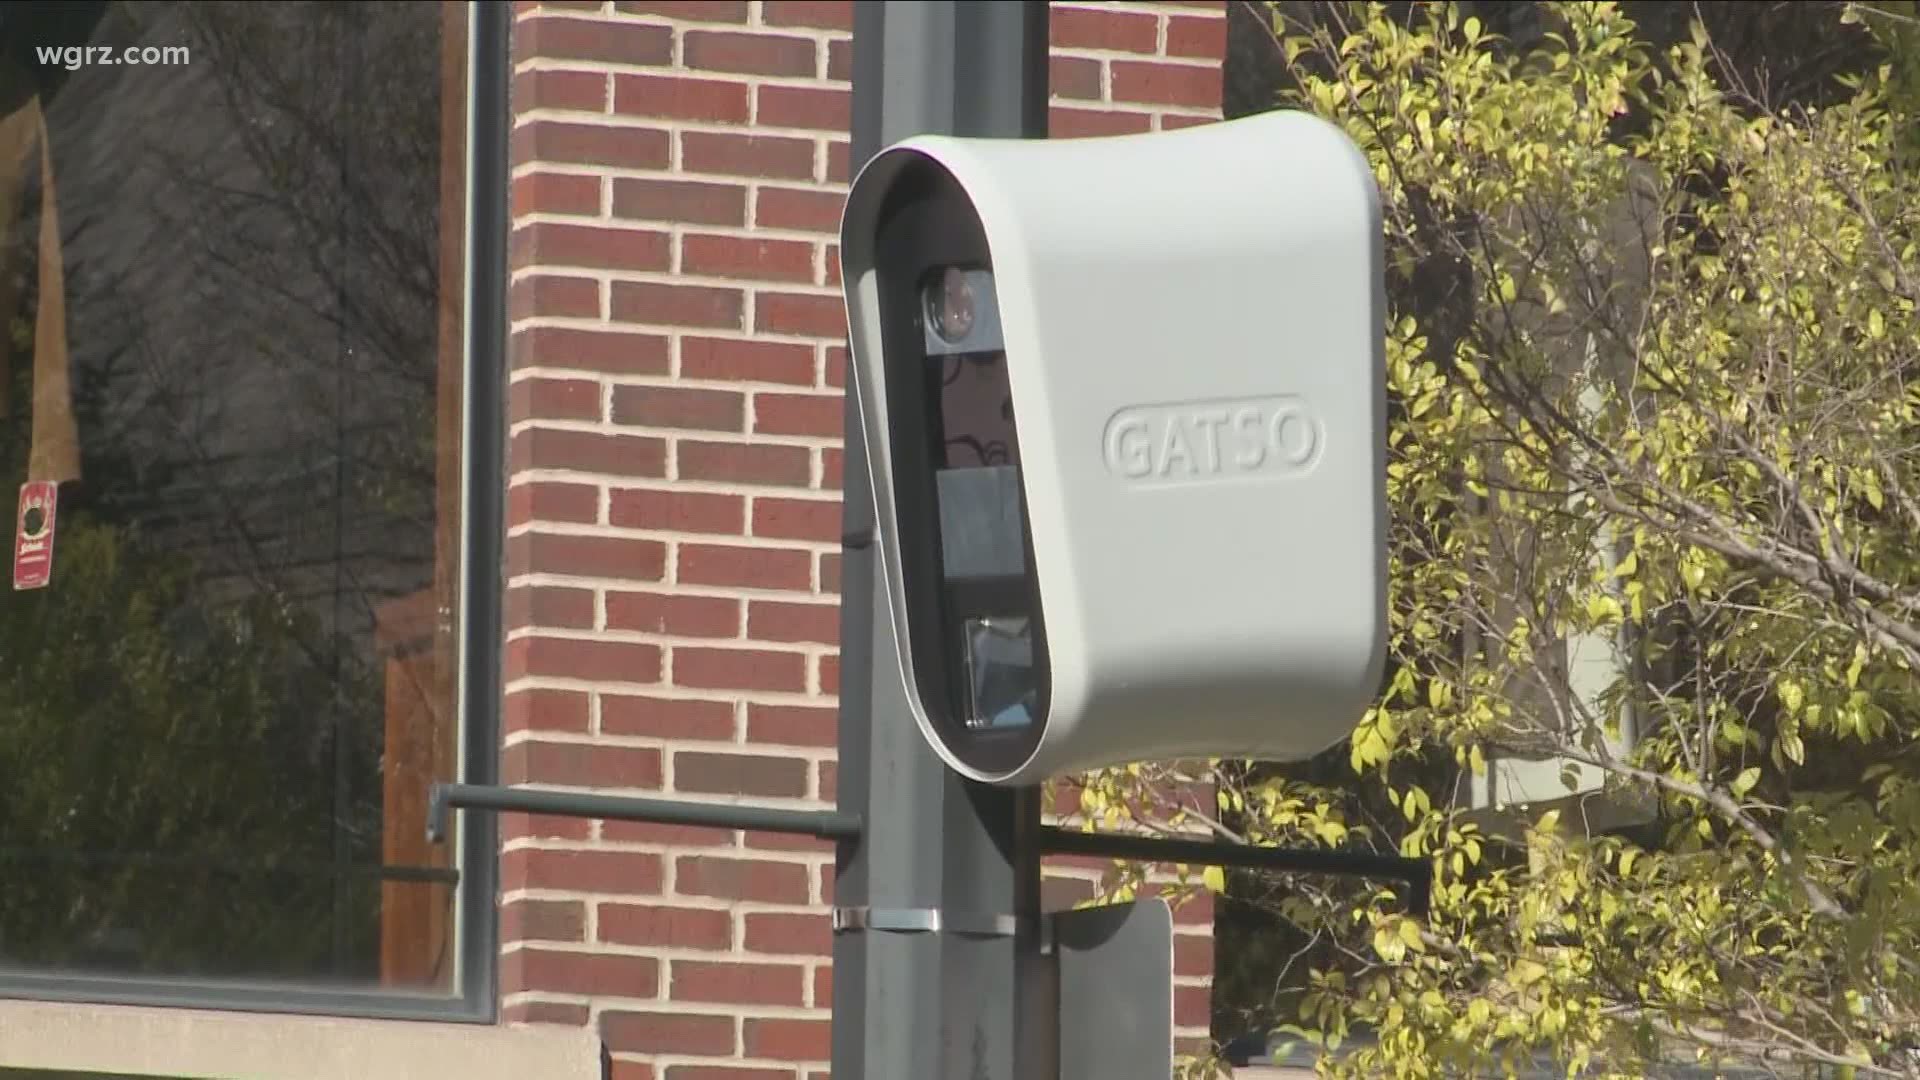 If you got a school speed zone violation recently from the City of Buffalo, there may be a chance that it was sent by accident.